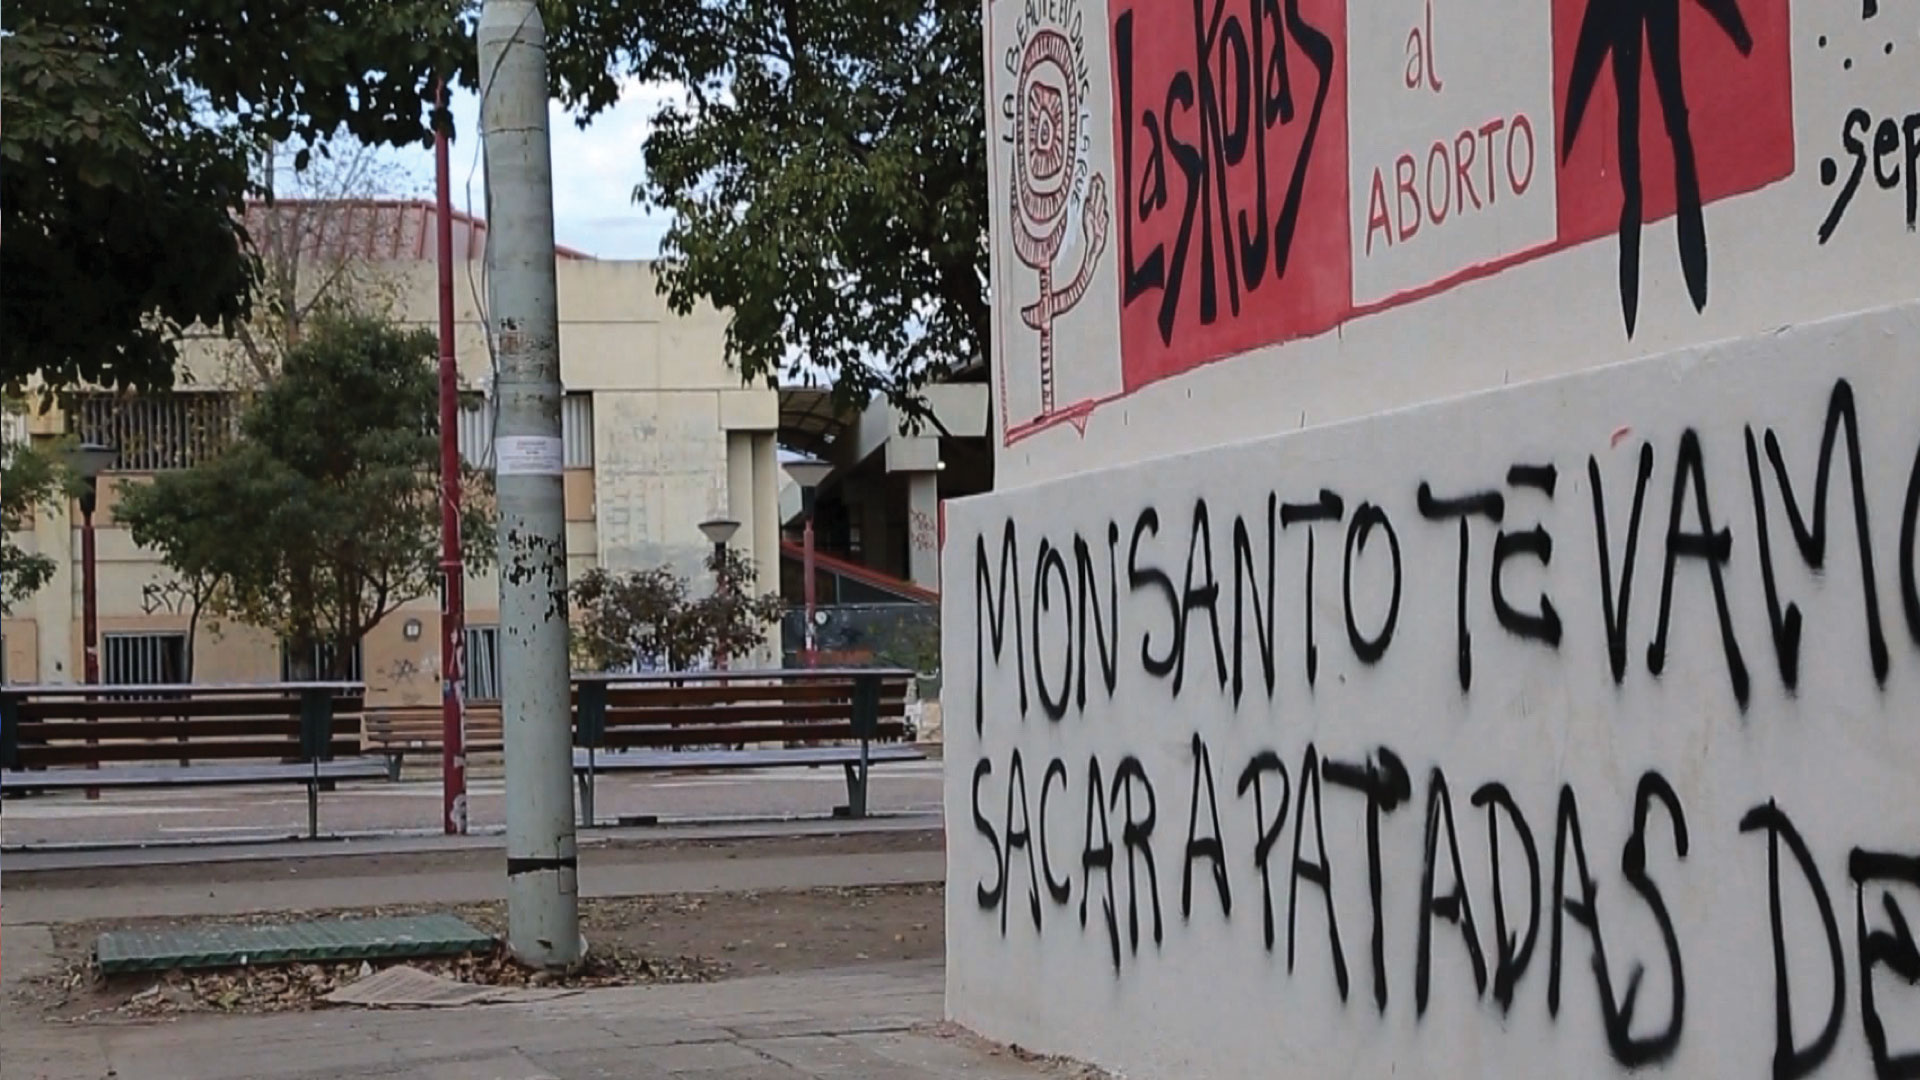 Genetically Modified Children Graffiti in Argentina city protesting the use of Monsanto agrochemicals like Roundup